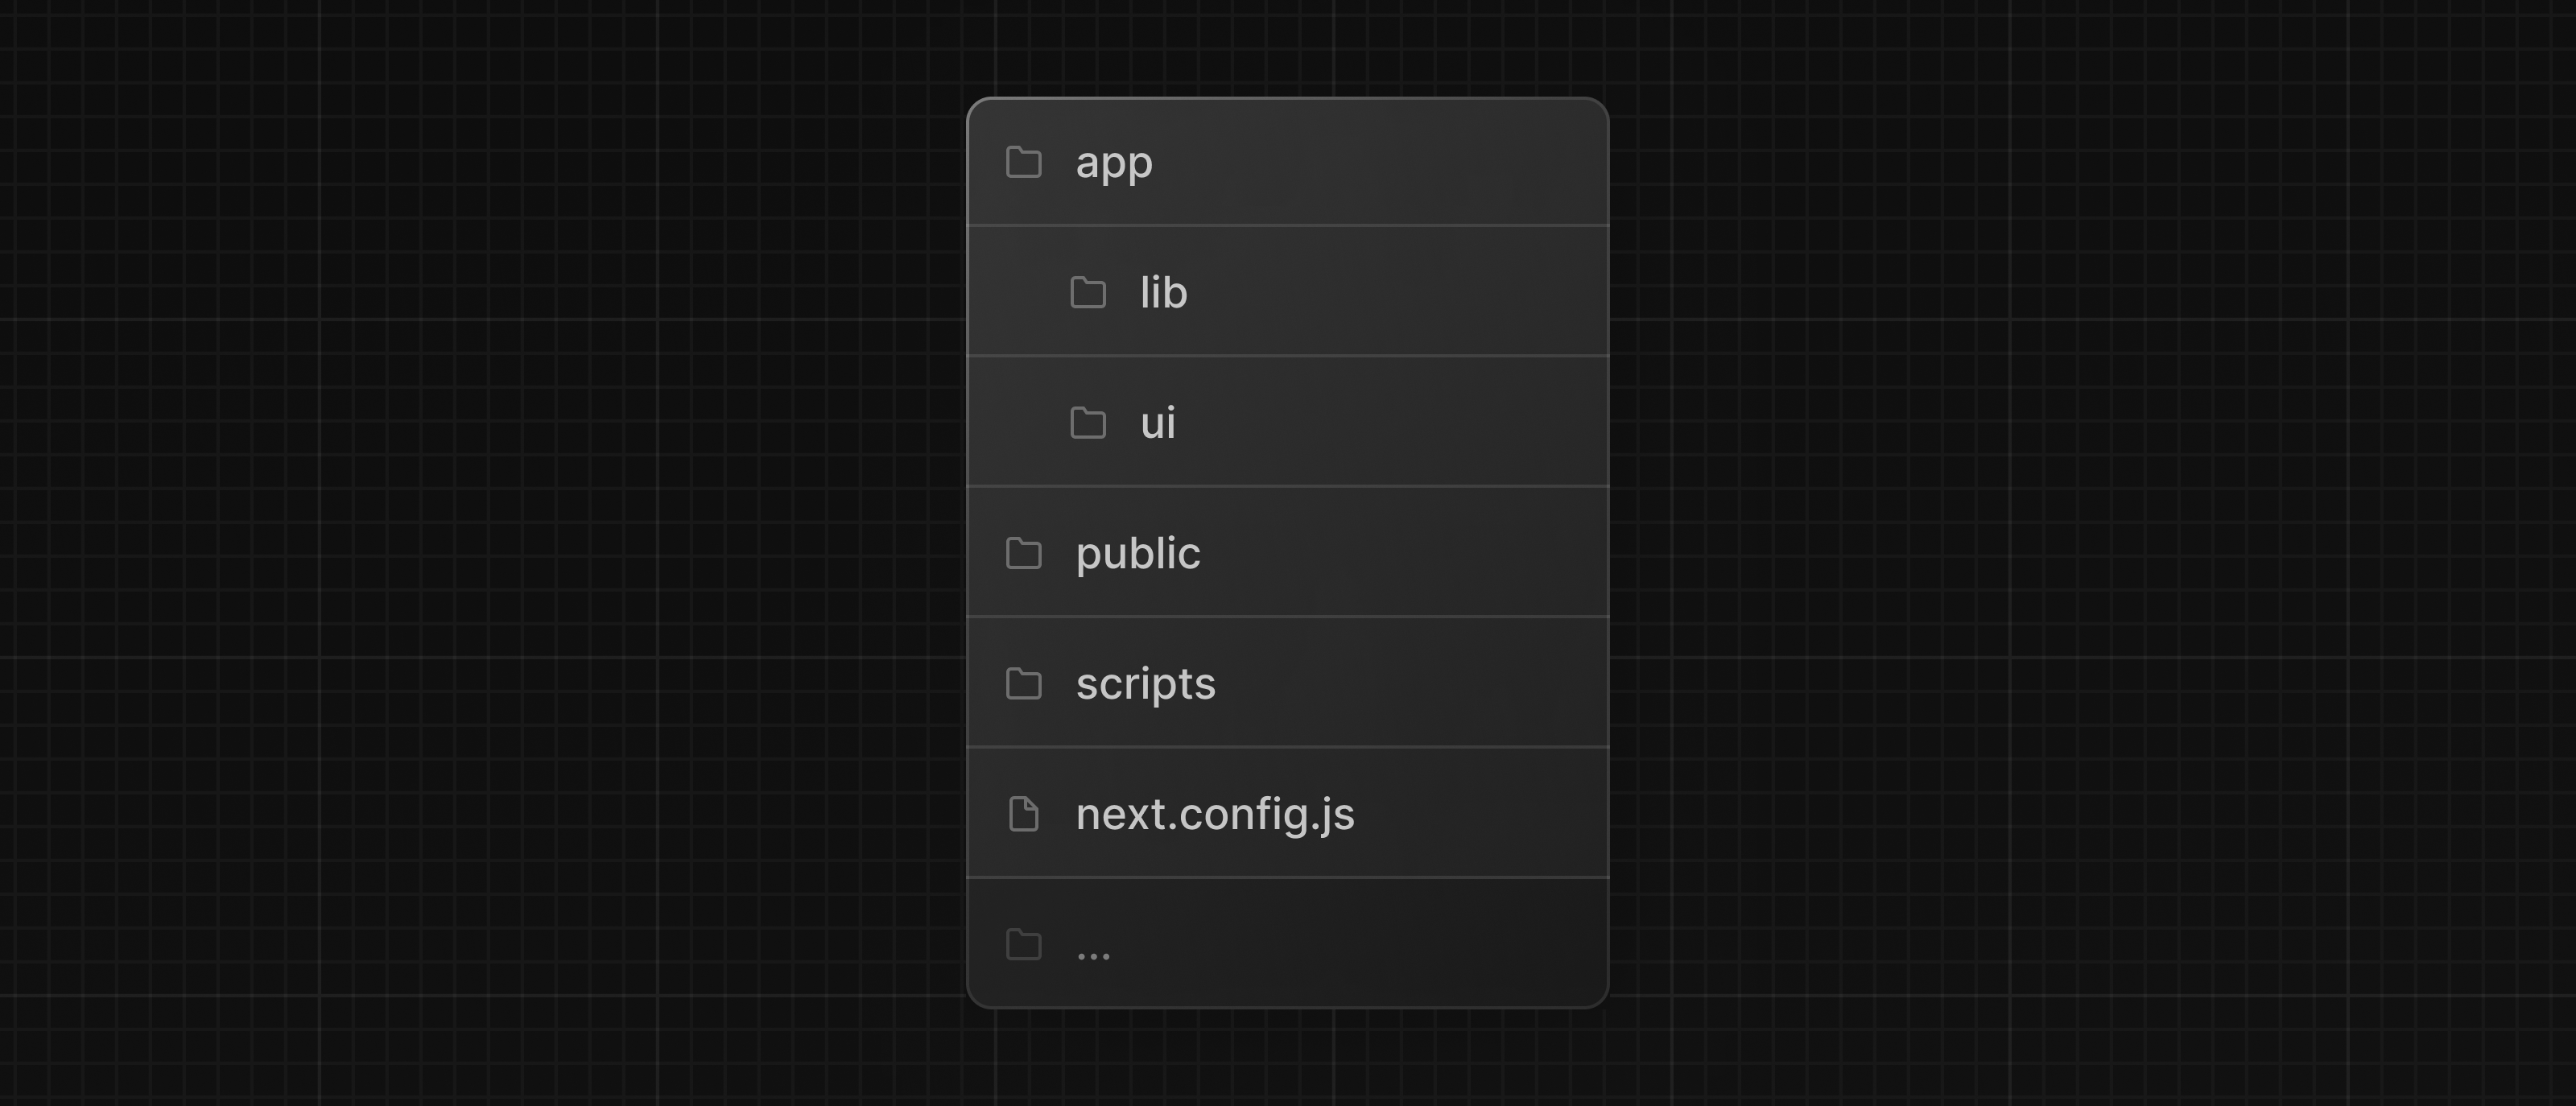 Folder structure of the dashboard project, showing the main folders and files: app, public, and config files.